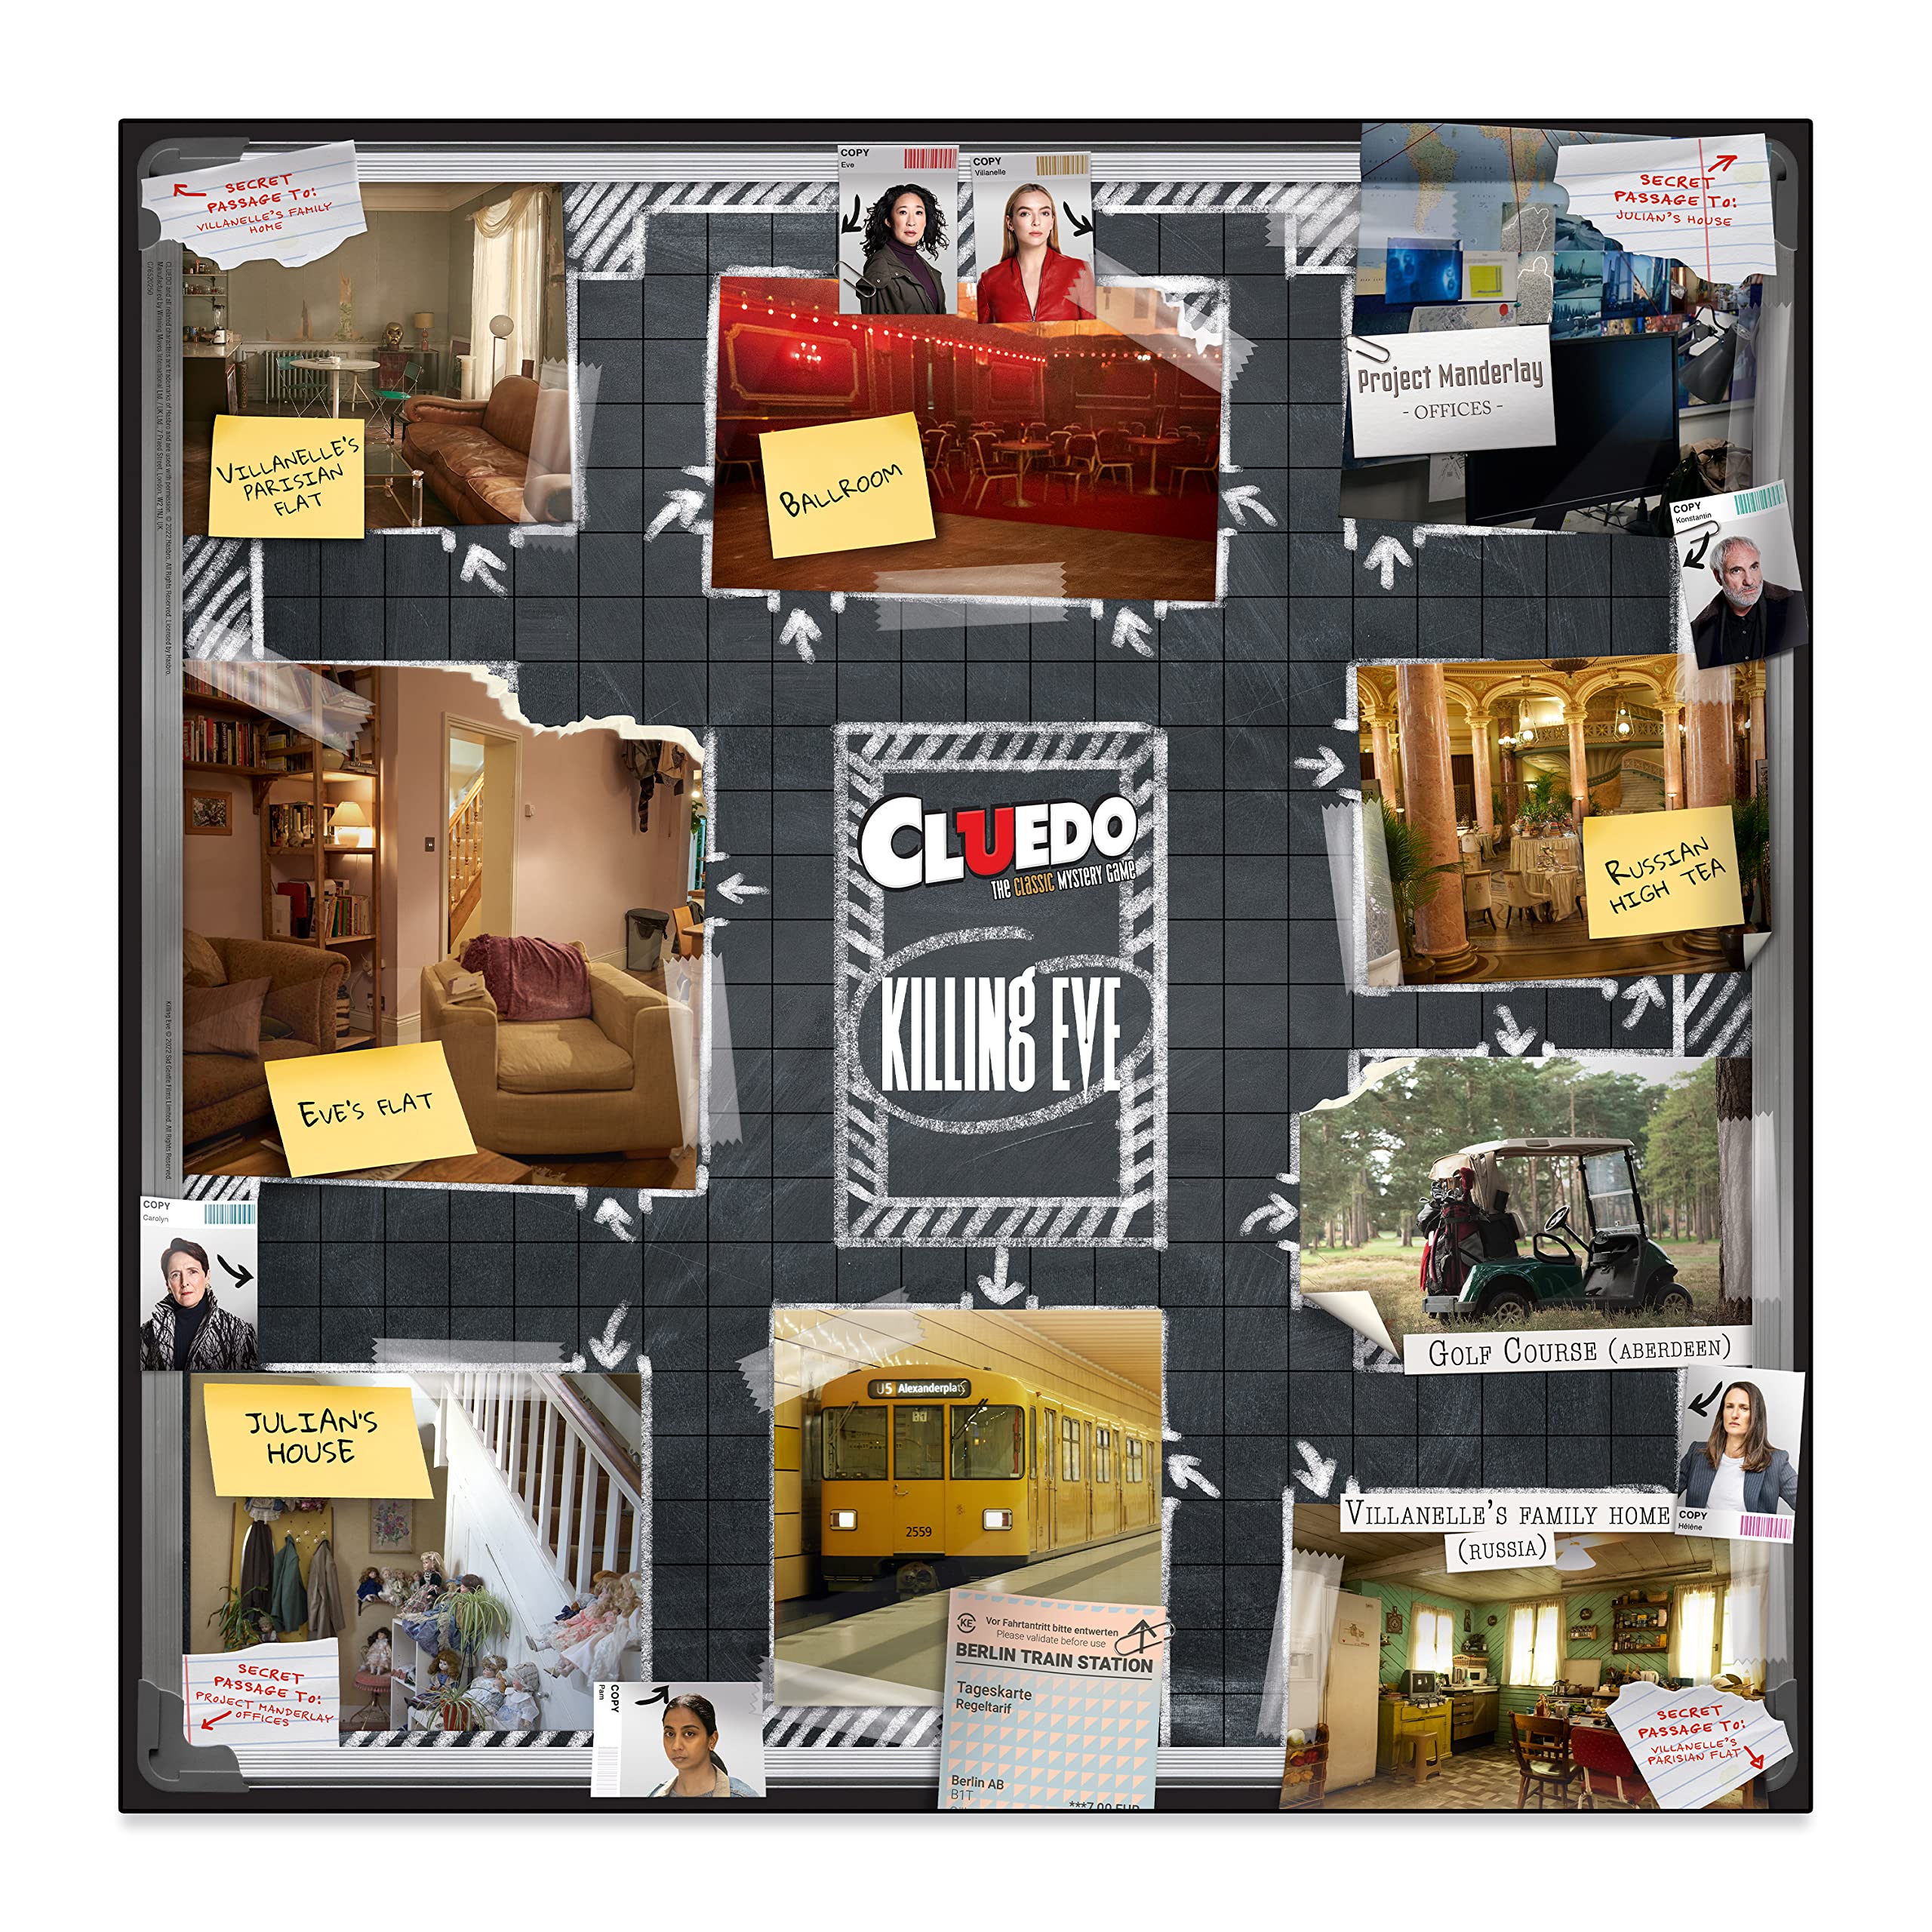 Winning Moves Killing Eve Cluedo Mystery Board Game, Become an MI5 Investigator and Determine who Killed Kenny, The Popular British Spy Thriller Television Series for Ages 14 Plus